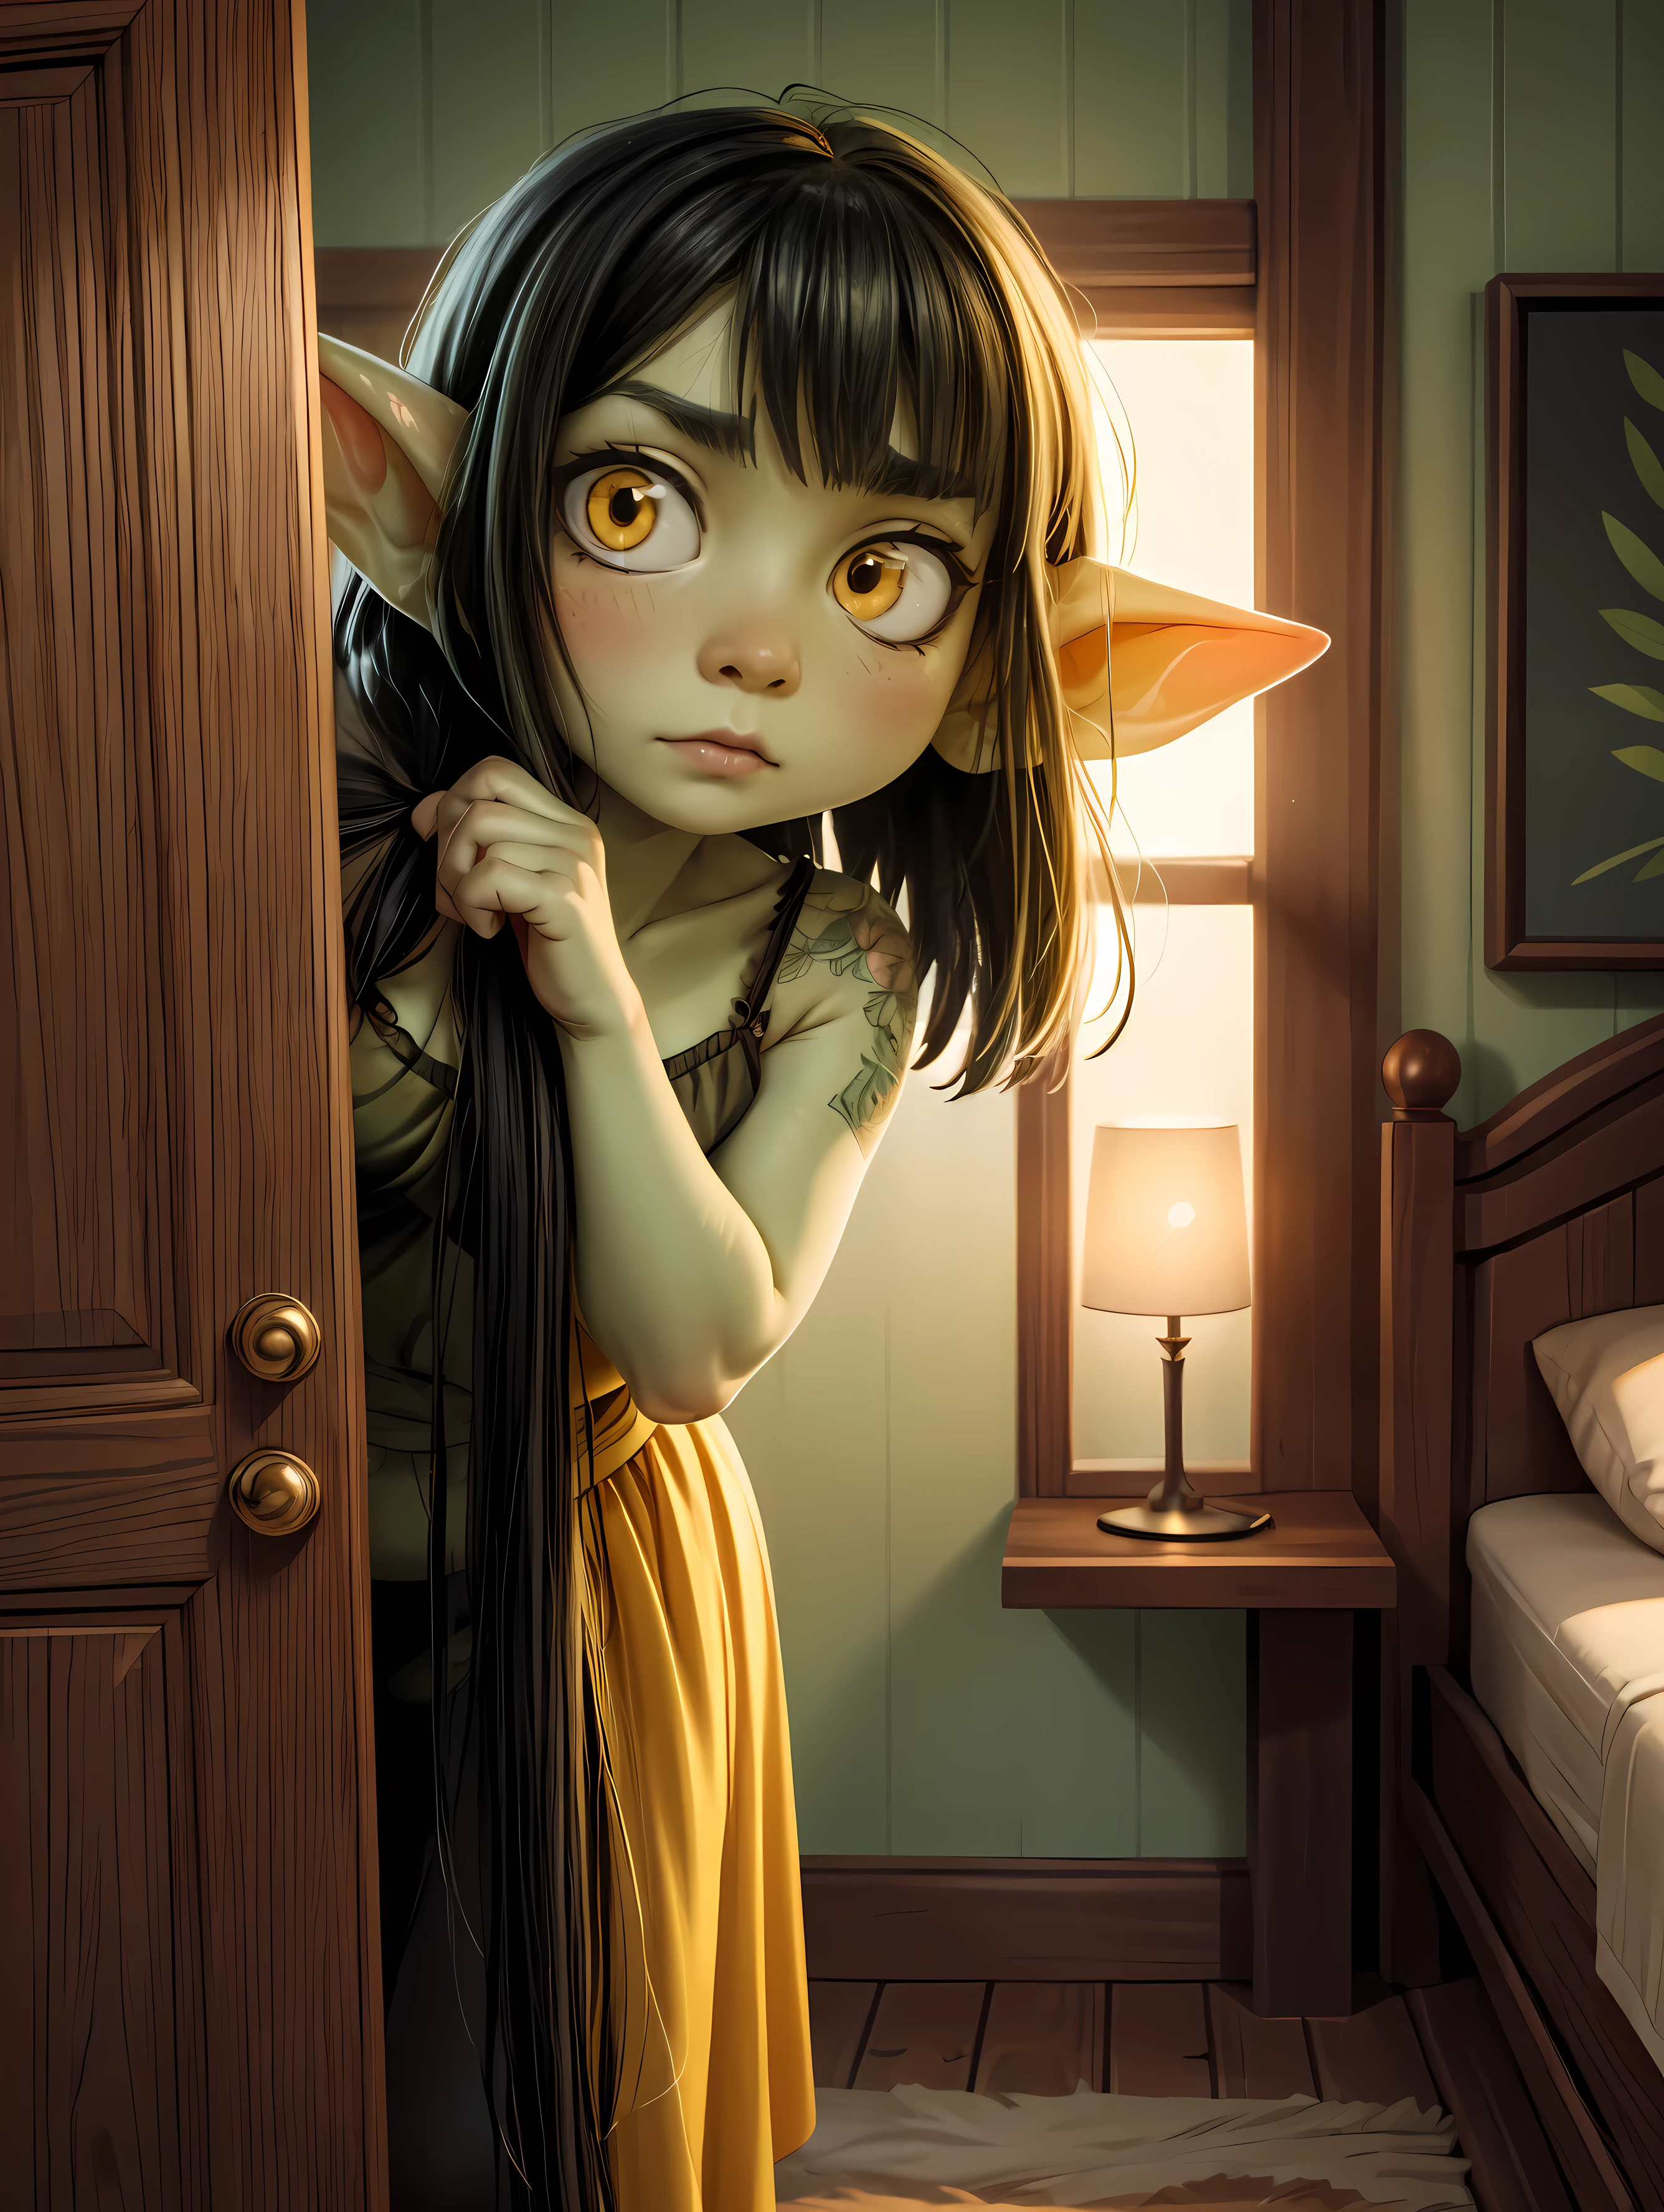 ((best quality)), ((masterpiece)), (detailed), absurdres, ((1 girl)), 1girl, solo, 4k, short heavyset chubby green goblin girl peeking out from behind a bedroom door, bed in background, focus on face, (black hair), green skin, yellow eyes, freckles, posing, (nervous expression:1.3), shy, embarrassed, wearing sexy yellow bra, cleavage, close up on face, blushing, unsure, extreme close up on face, peeking out upper body, depth of field, soft lighting, romantic lighting